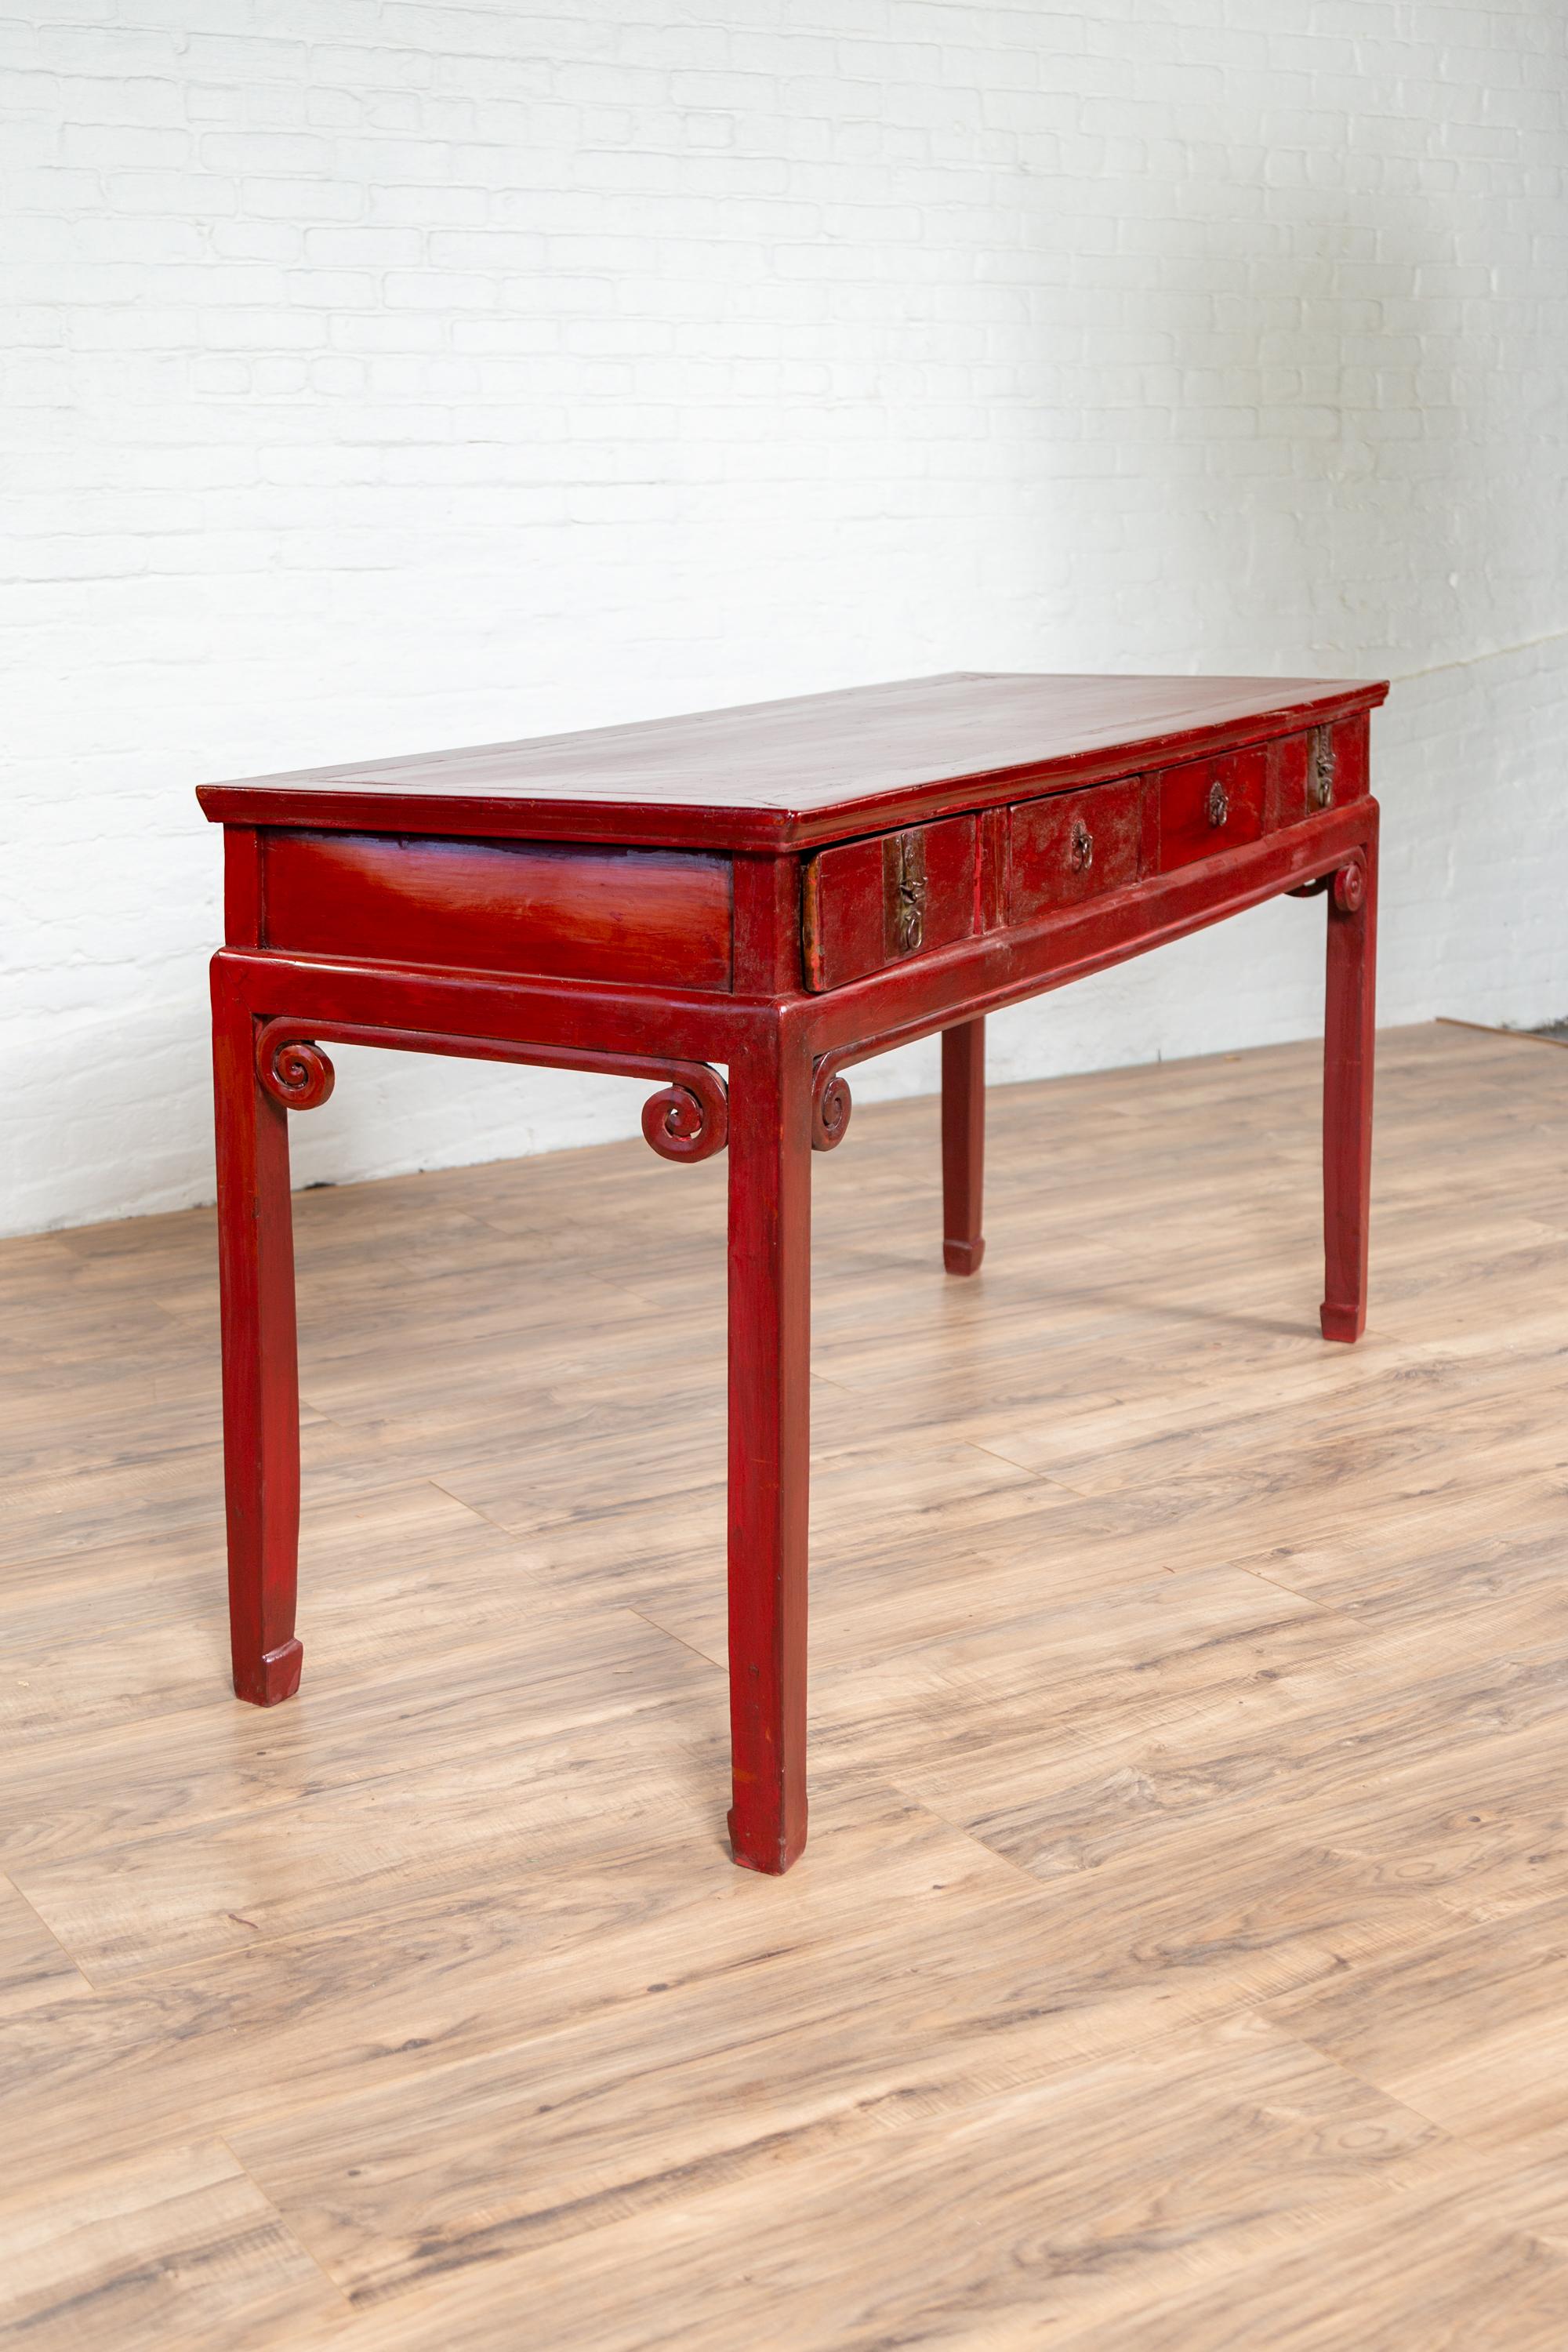 Chinese Antique Red Lacquered Wooden Desk with Four Drawers and Curling Scrolls 4